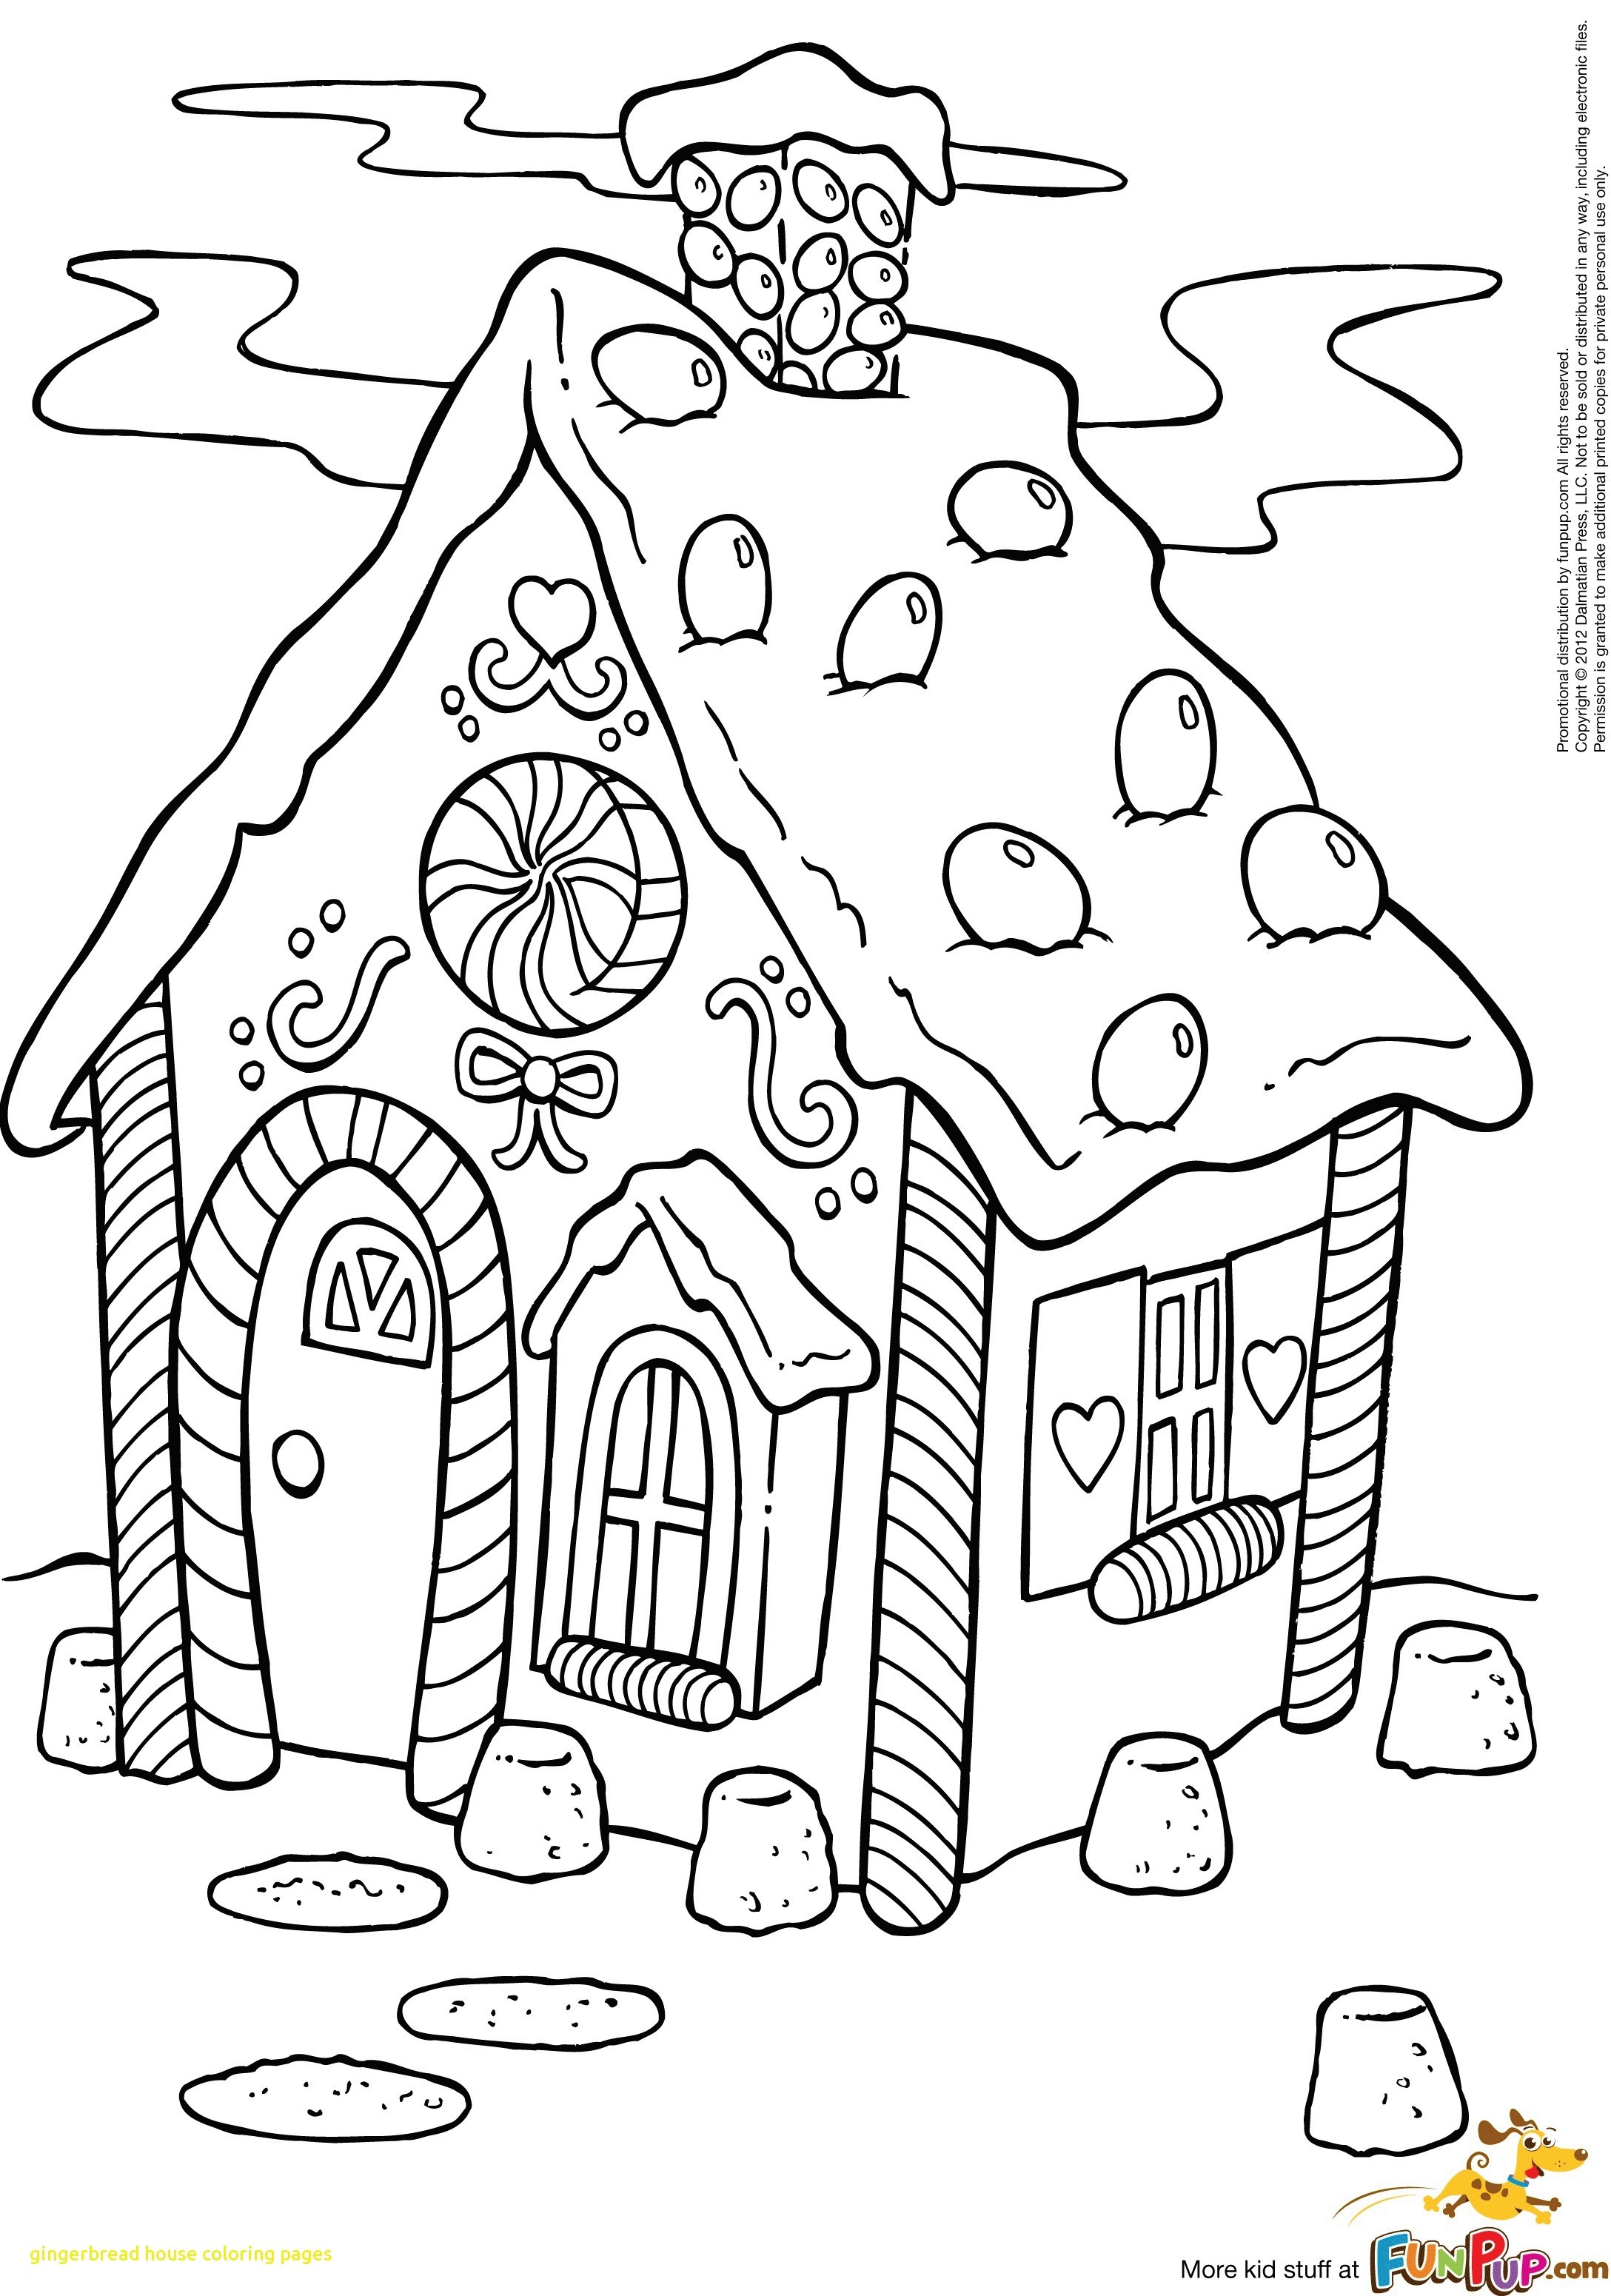 christmas coloring pages gingerbread man Free printable gingerbread man coloring pages for kids